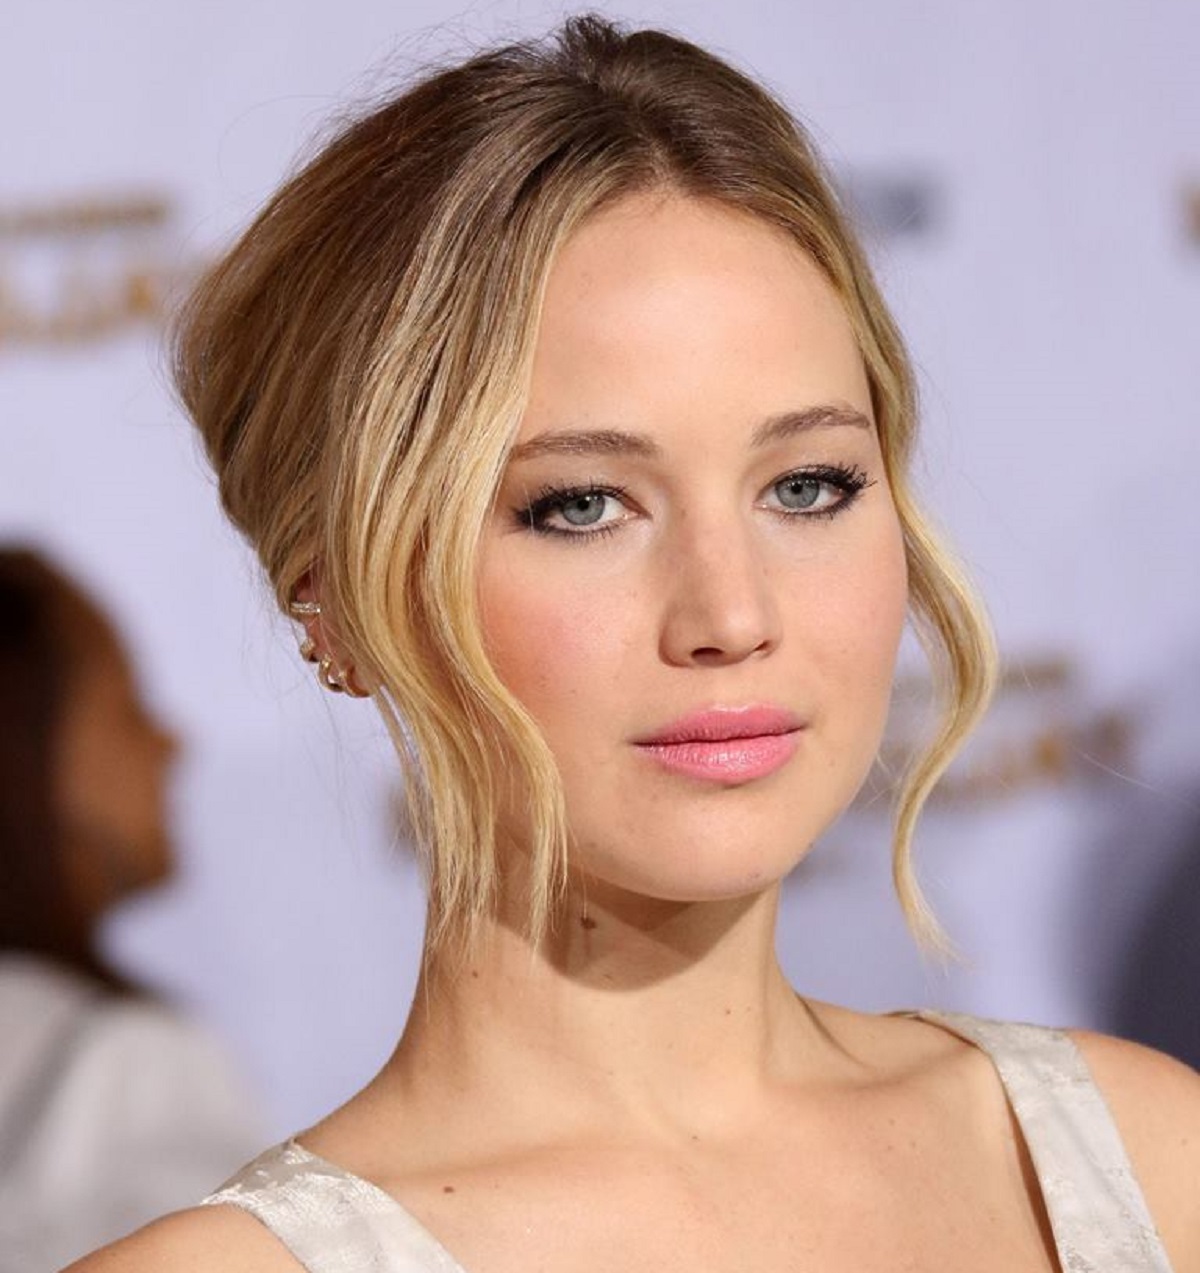 Here are 5 Great Reasons to Love Jennifer Lawrence . . .